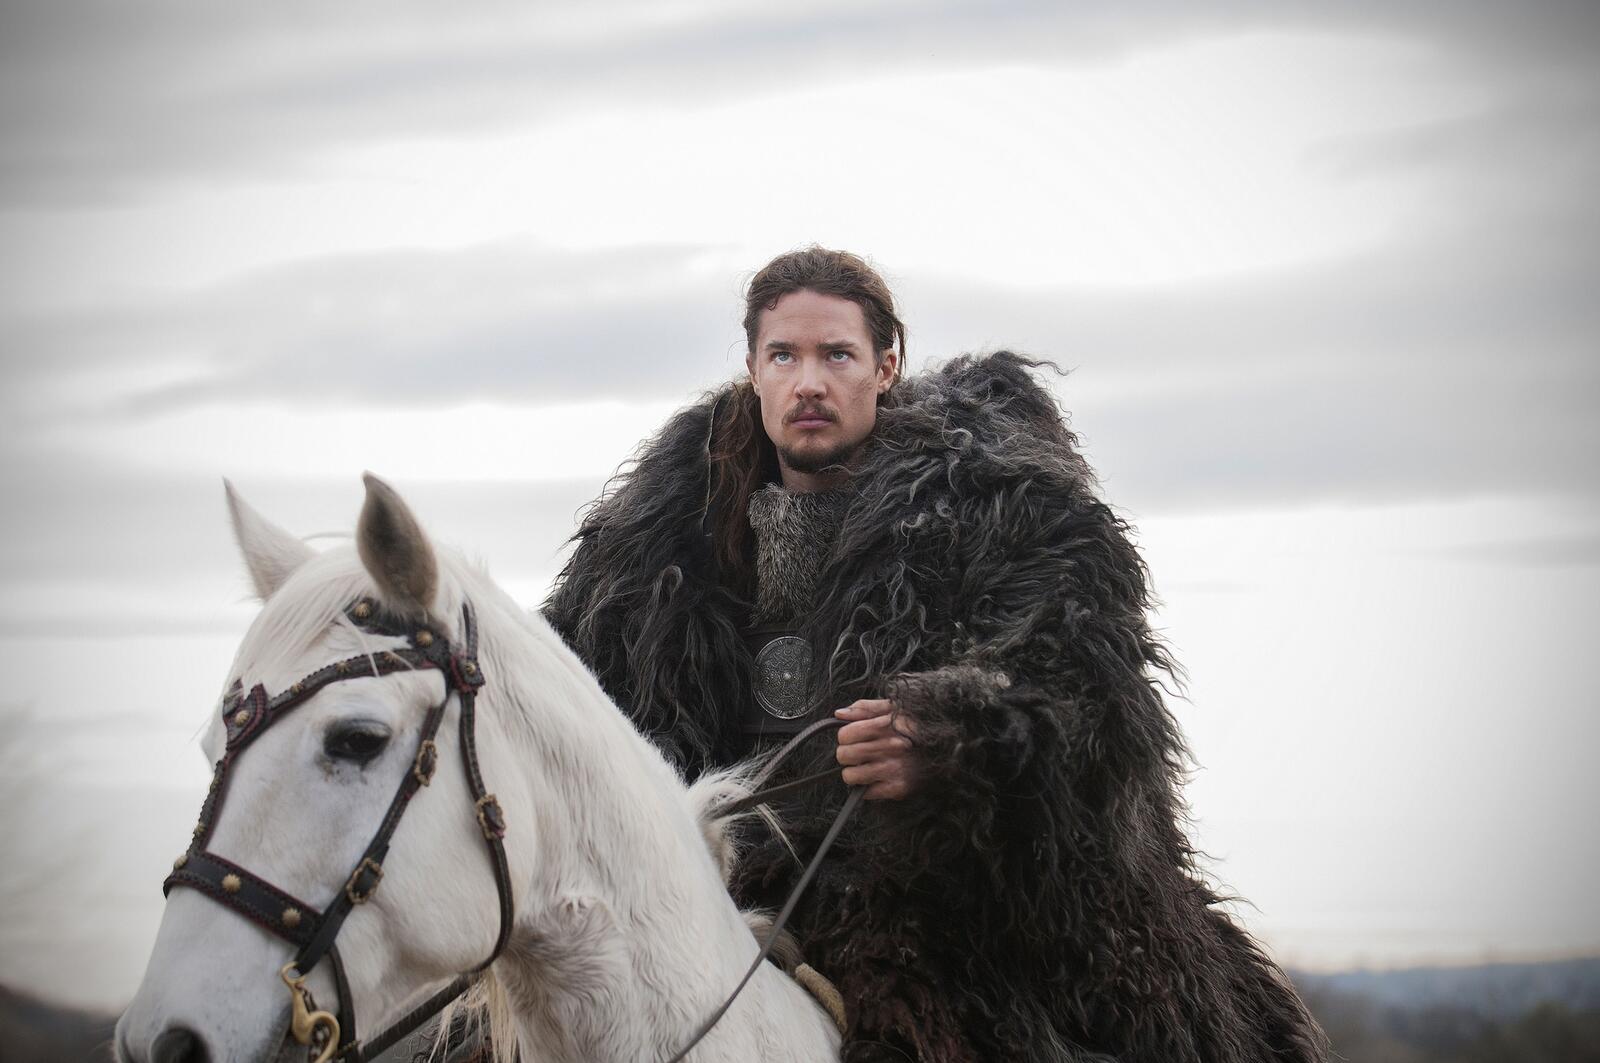 Wallpapers tv series horse the last kingdom on the desktop